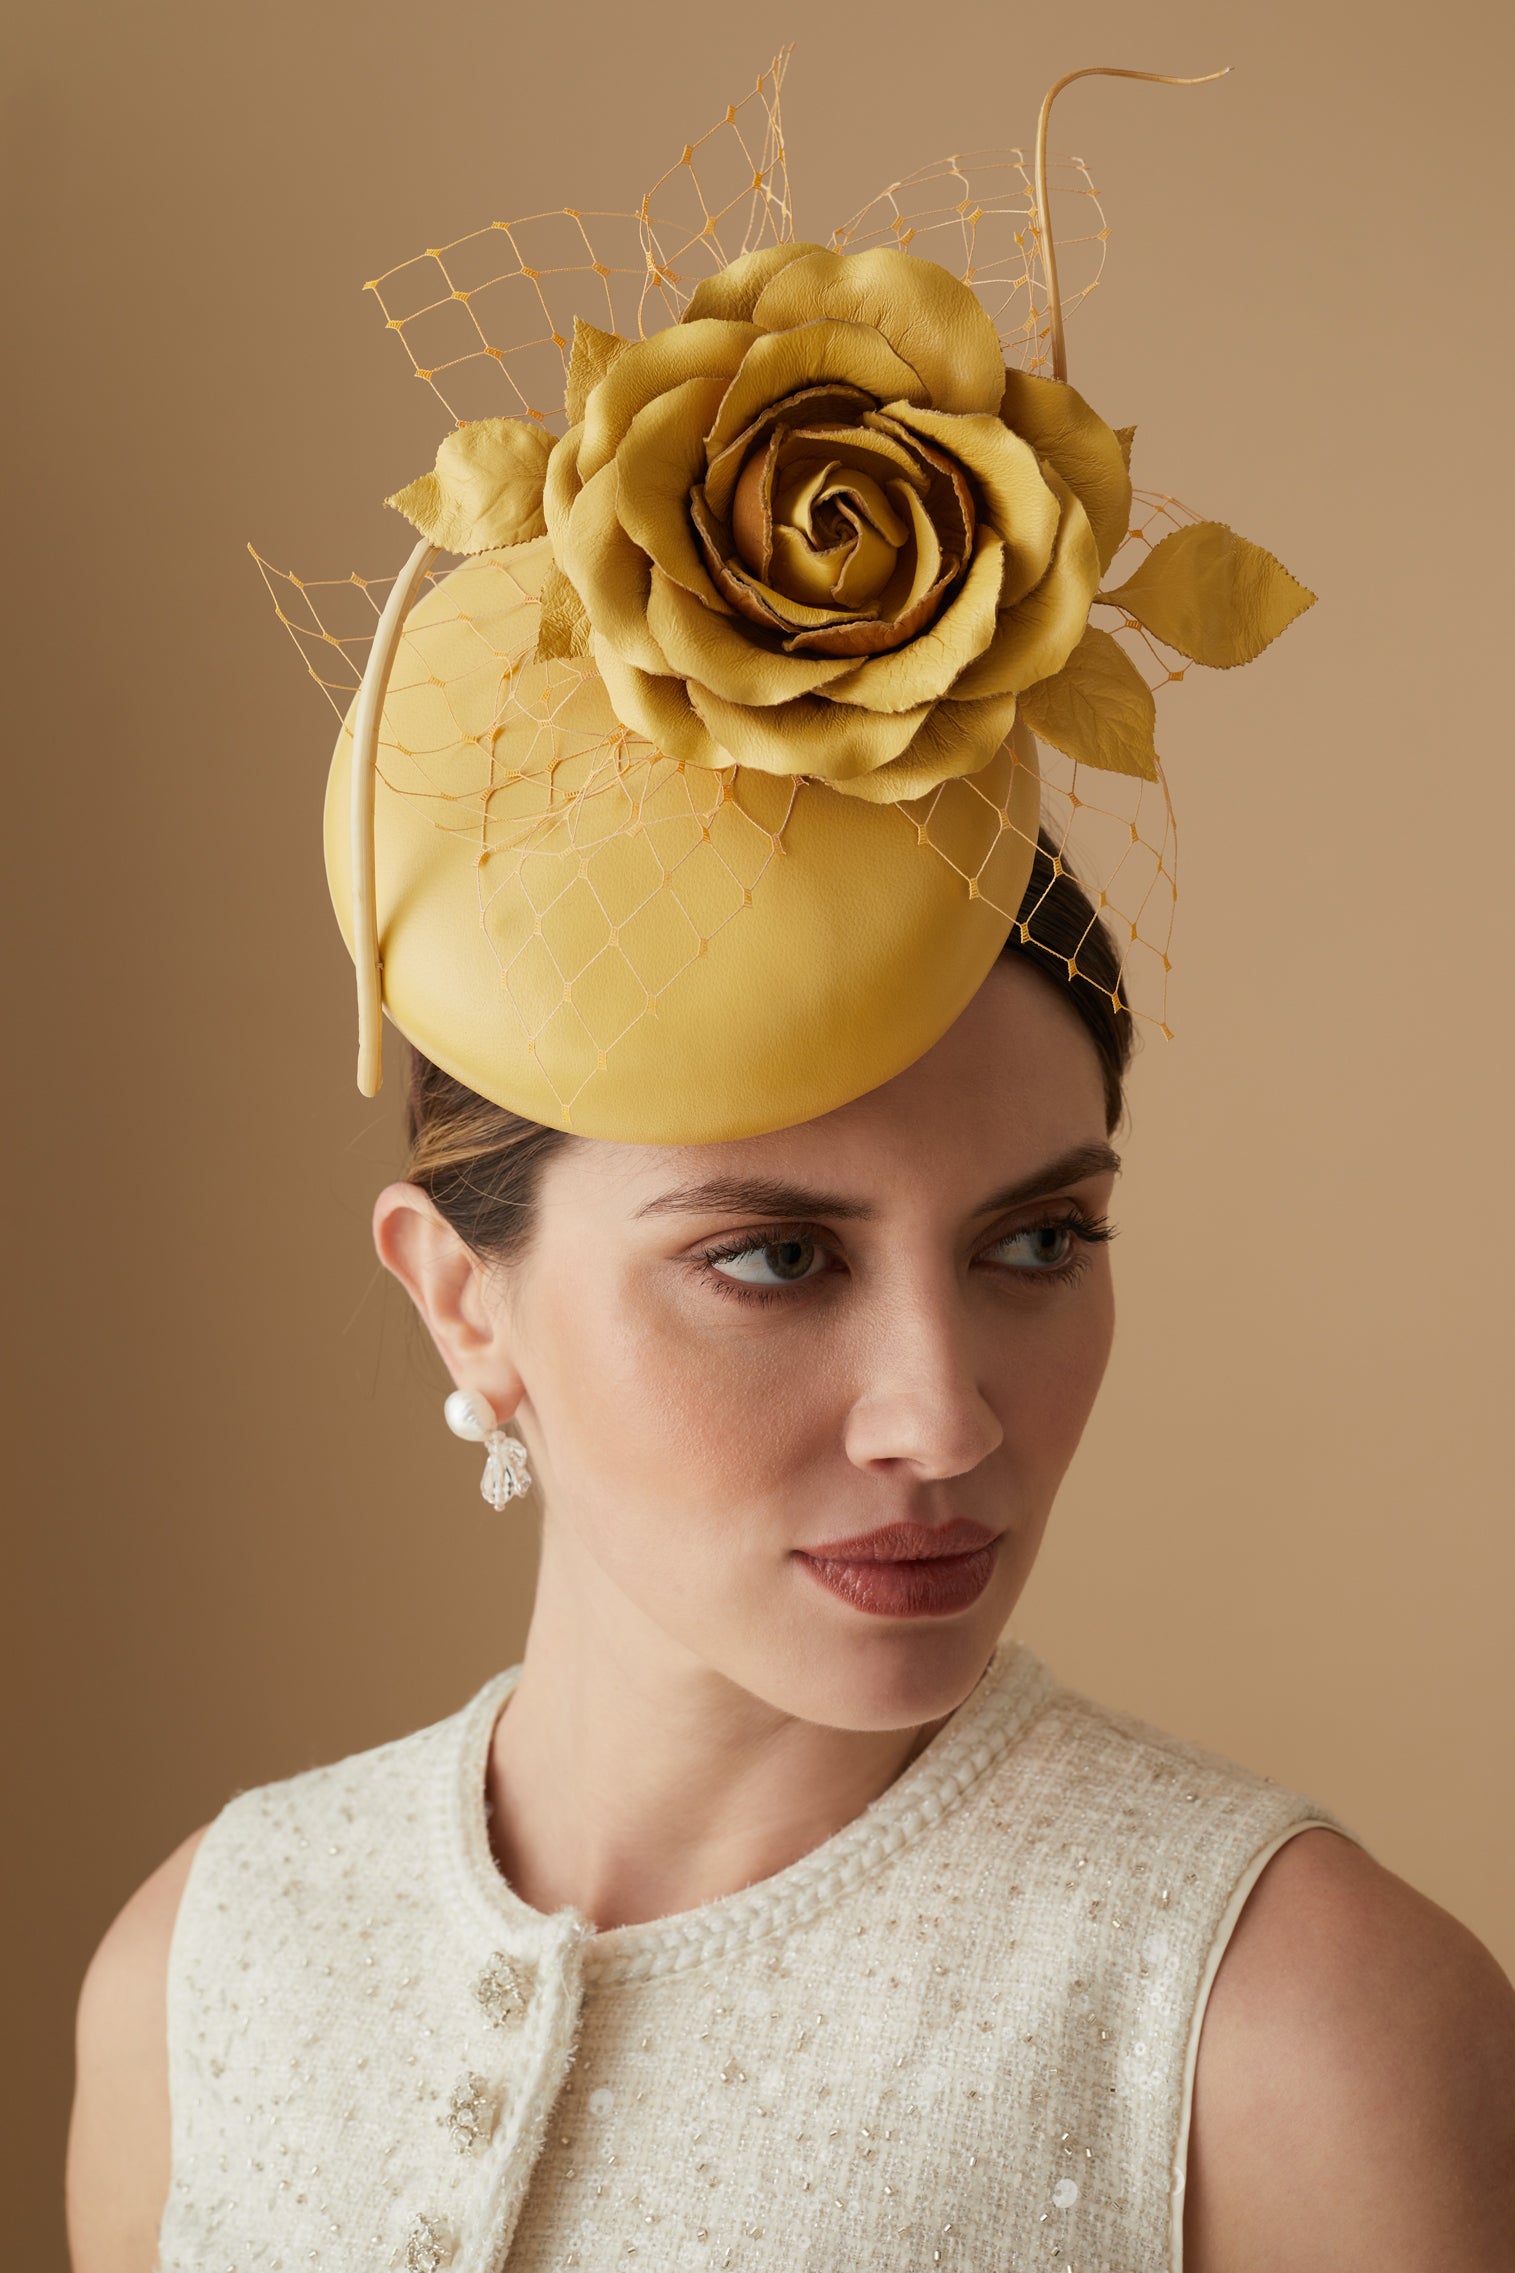 Rose Bud Yellow Leather Percher Hat - Grand National Hats - Lock & Co. Hatters London UK